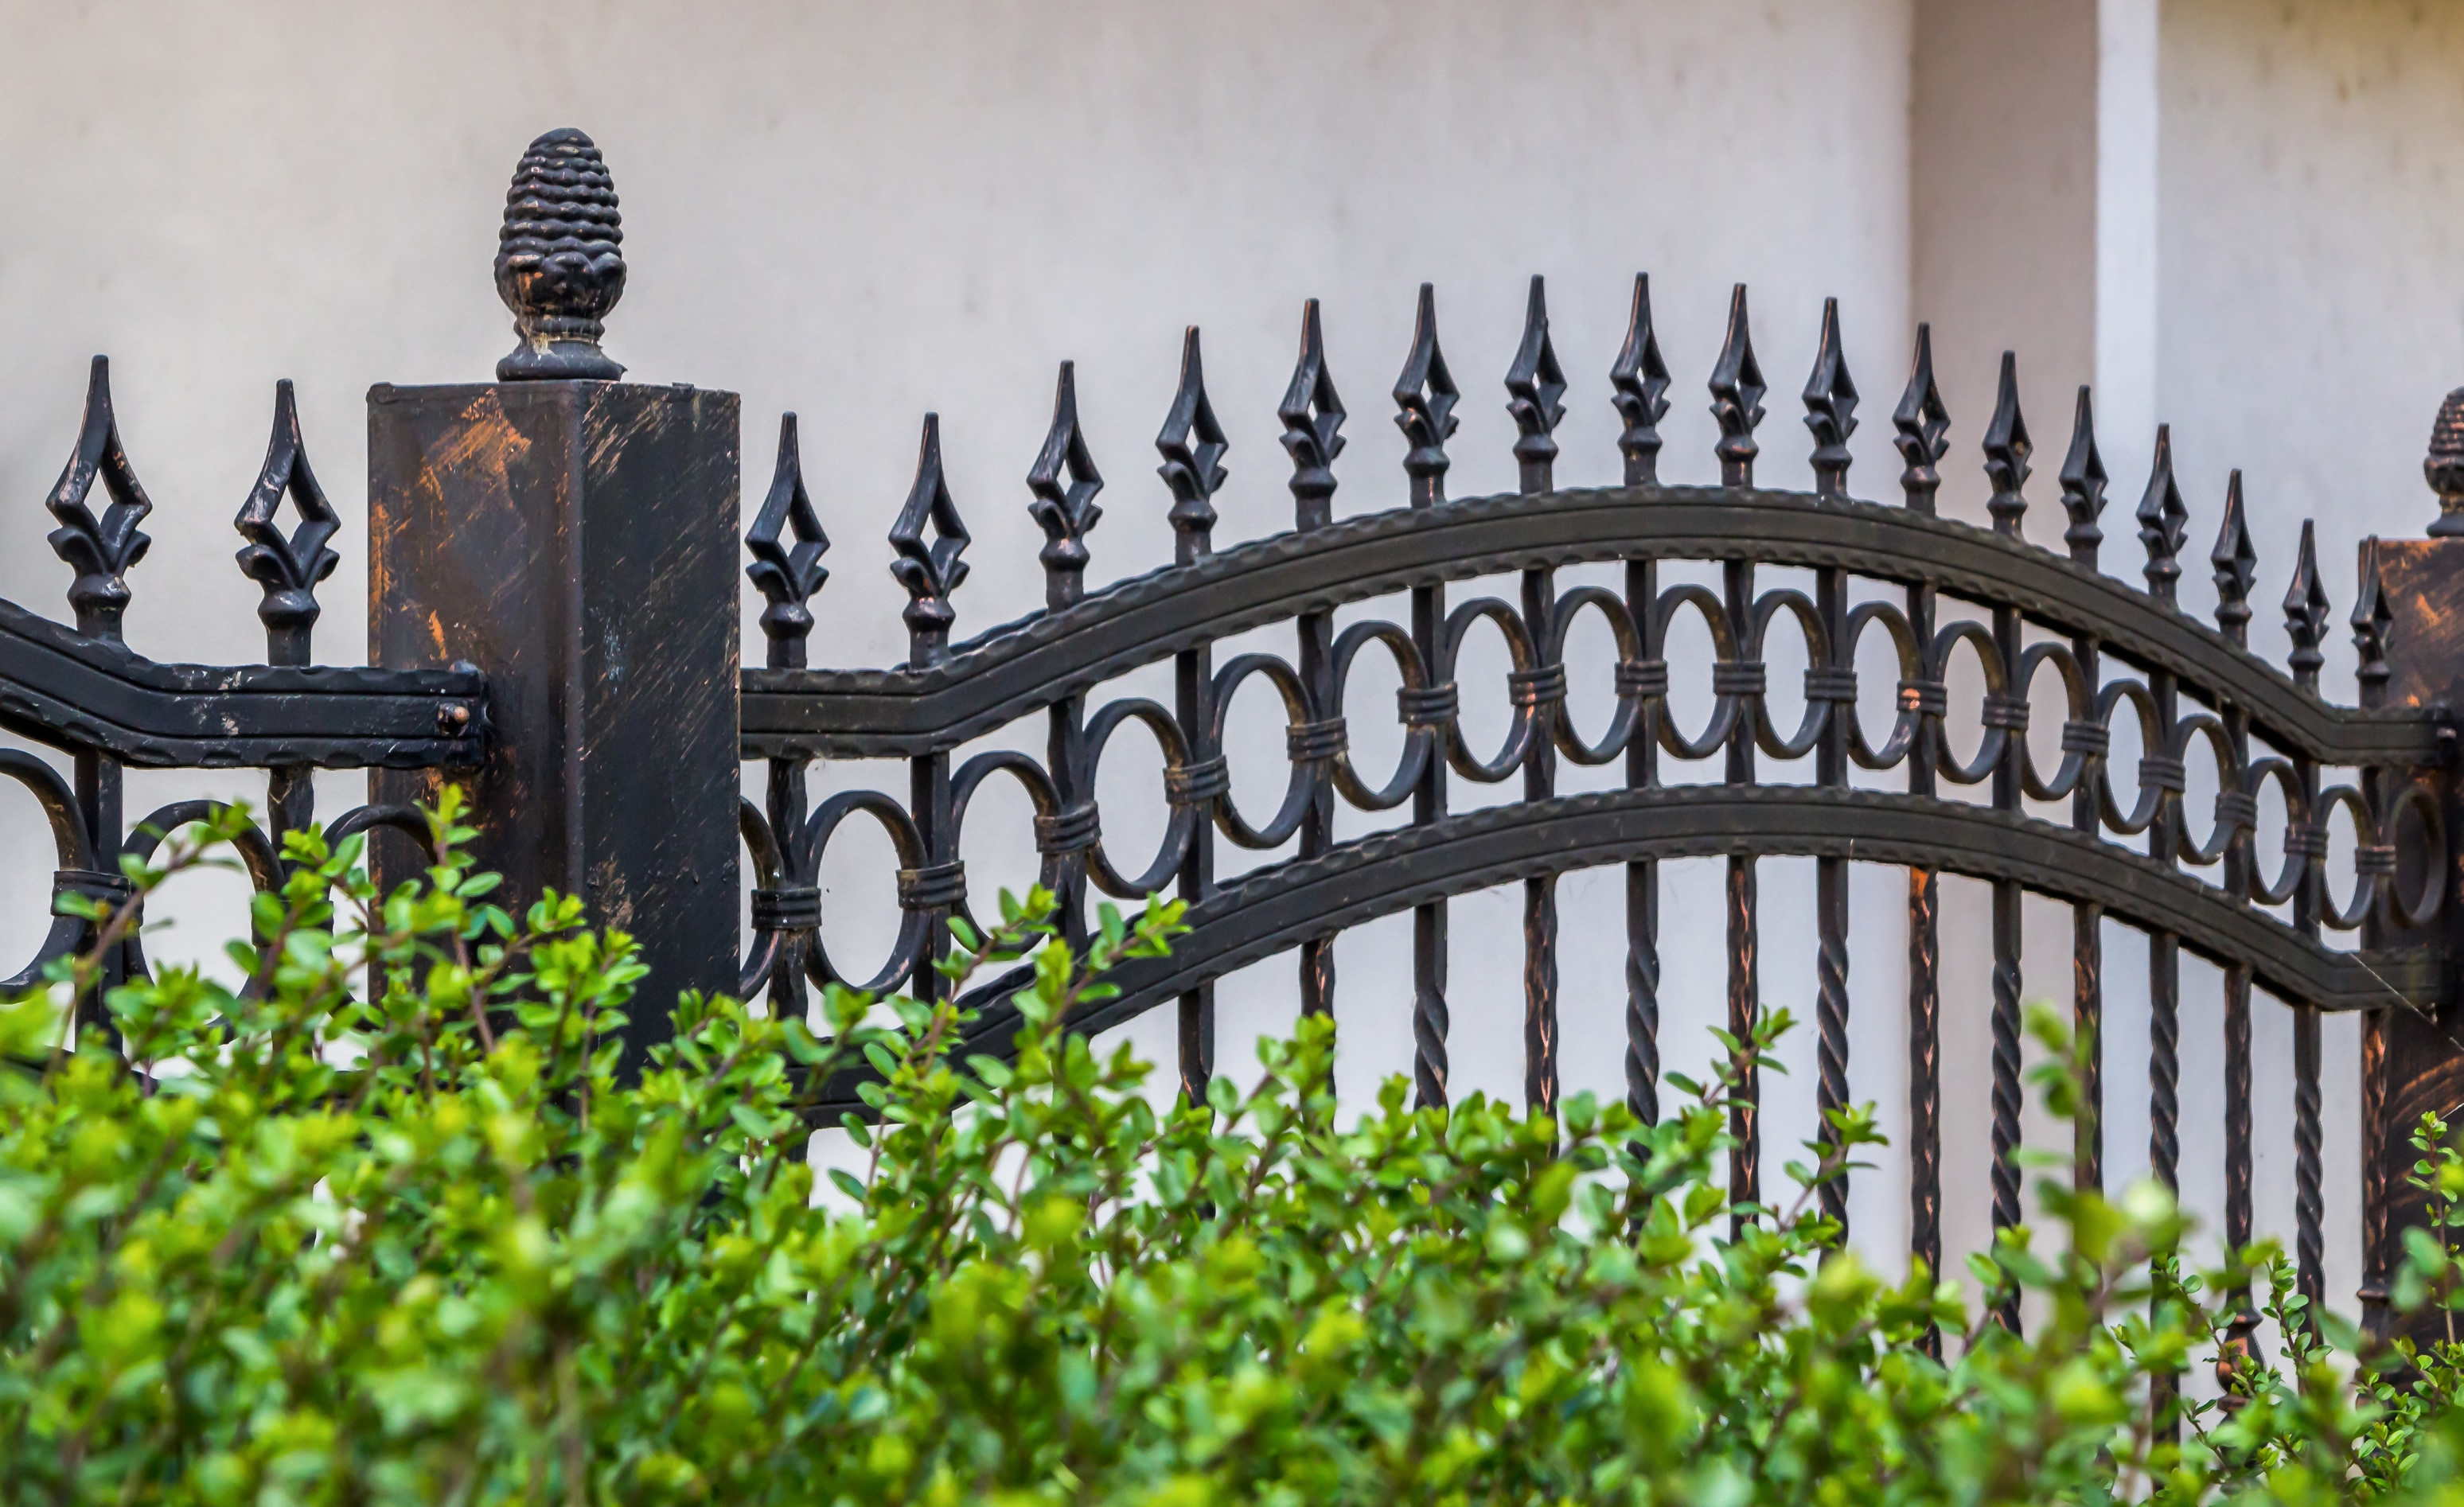 Black Wrought Fence with spikes | Source: Shutterstock.com